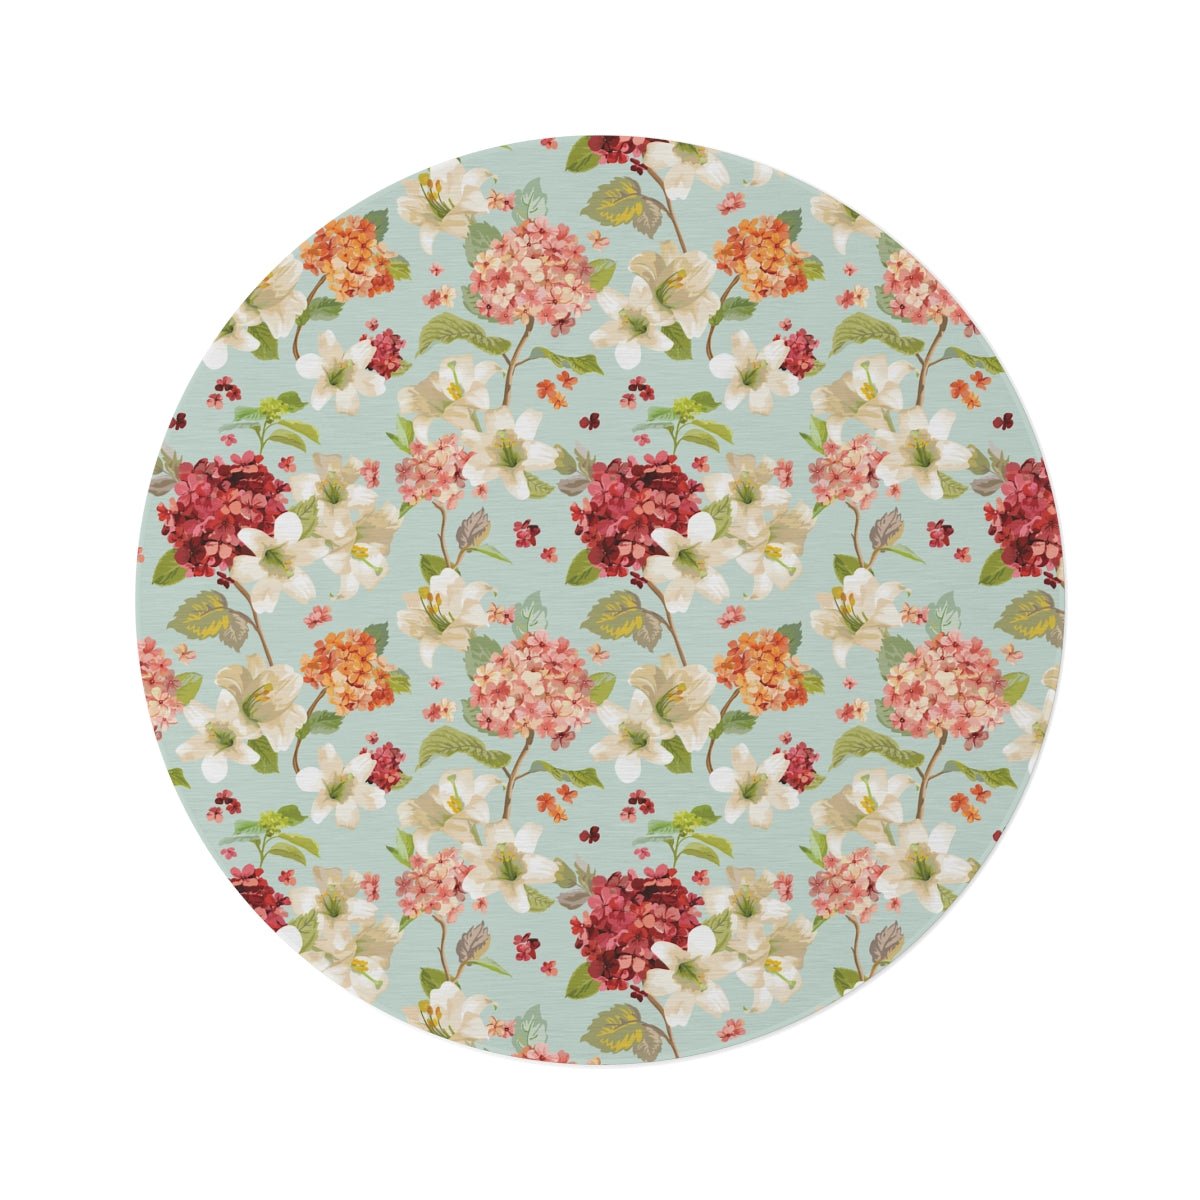 Autumn Hortensia and Lily Flowers Round Rug - Puffin Lime